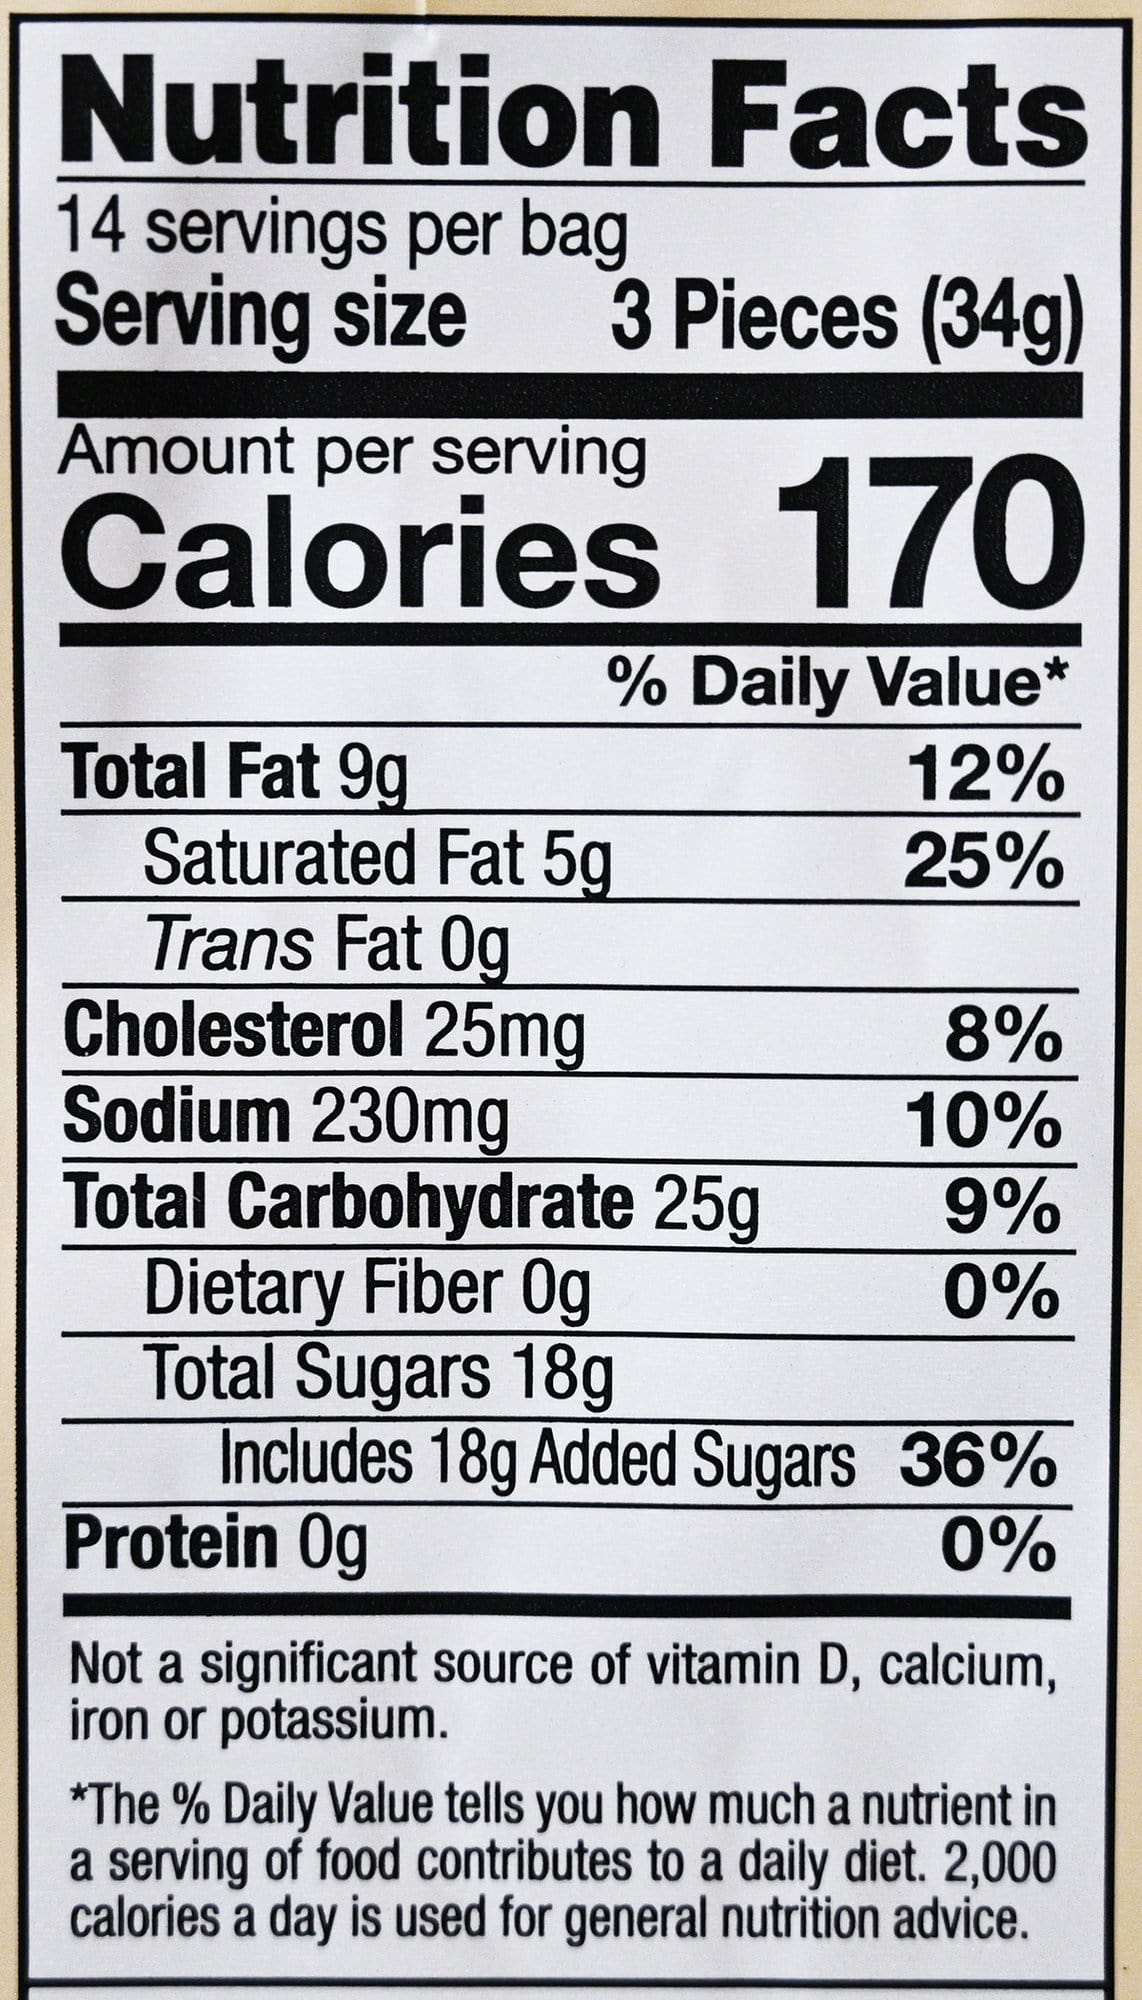 Image of the nutrition facts for the caramels from the back of the bag.